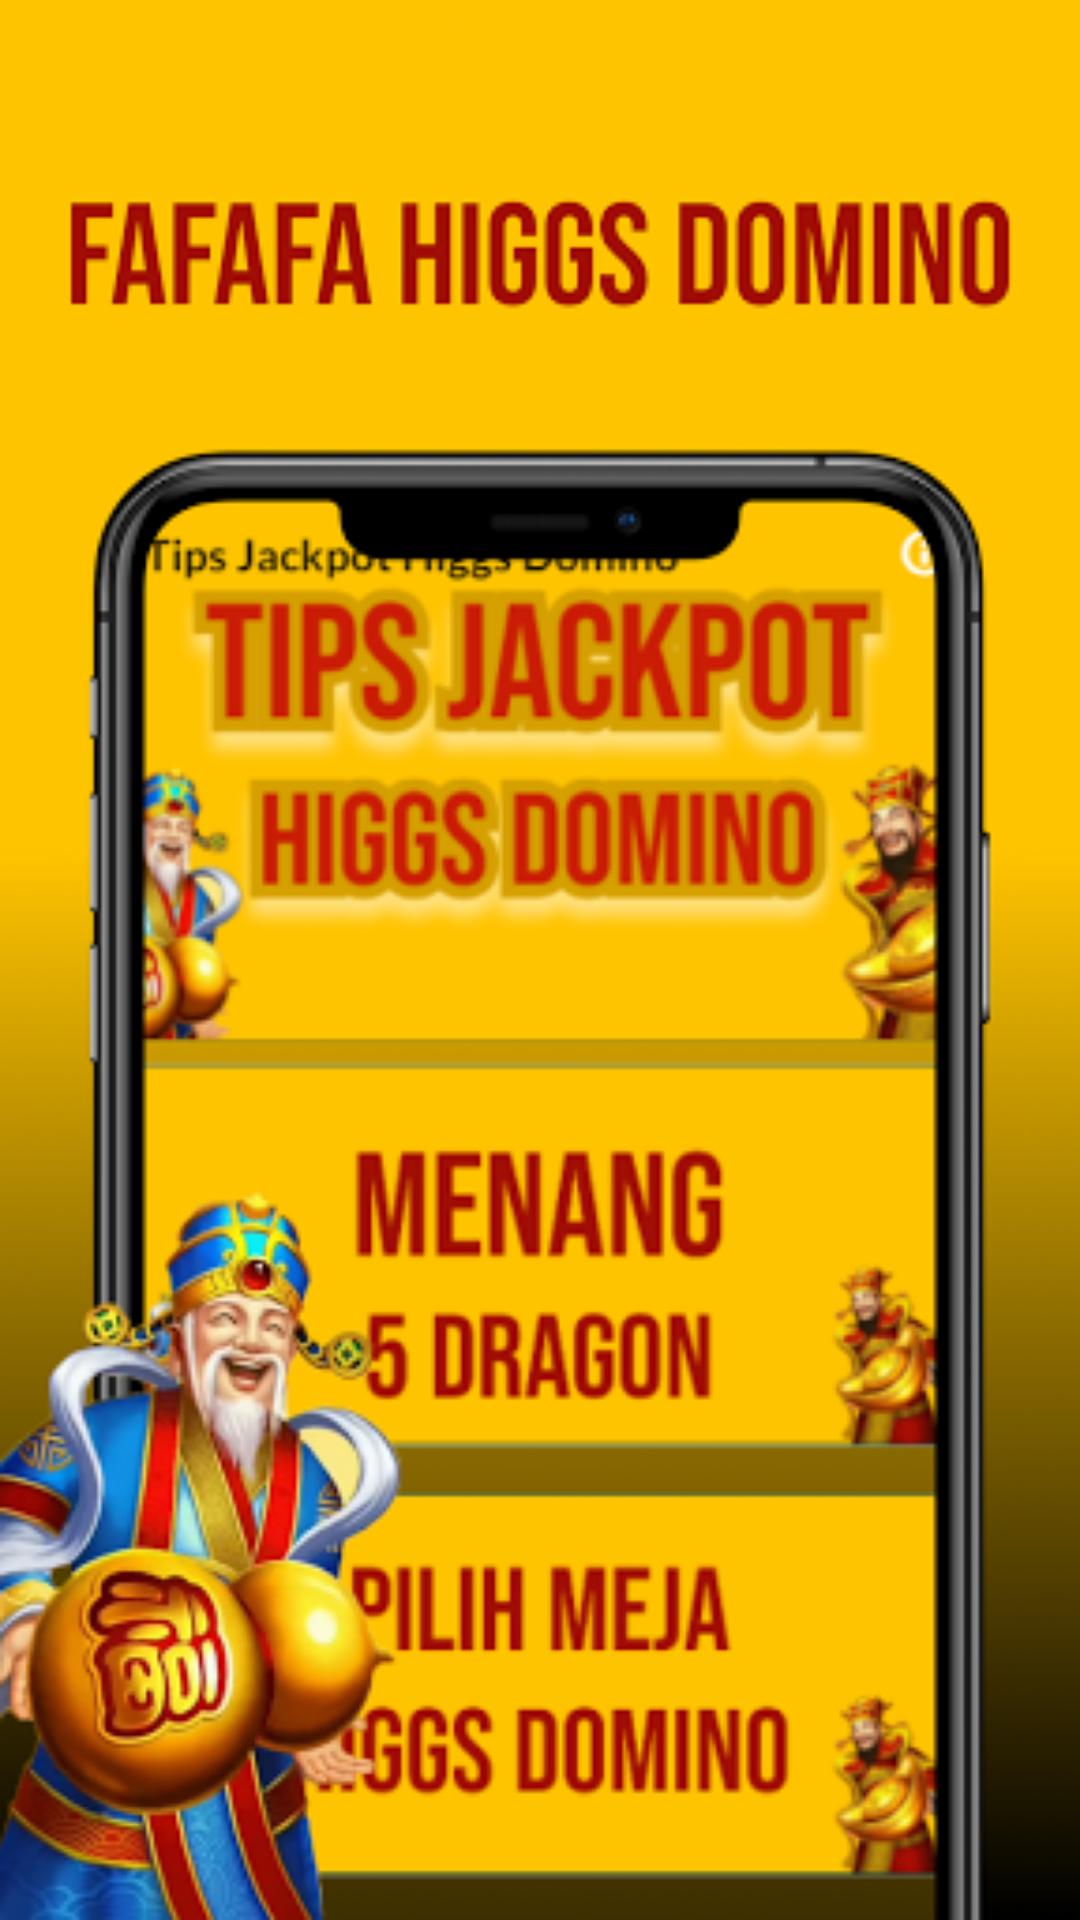 Slots Duo Fu Duo Cai Higgs Domino Island Guide For Android Apk Download